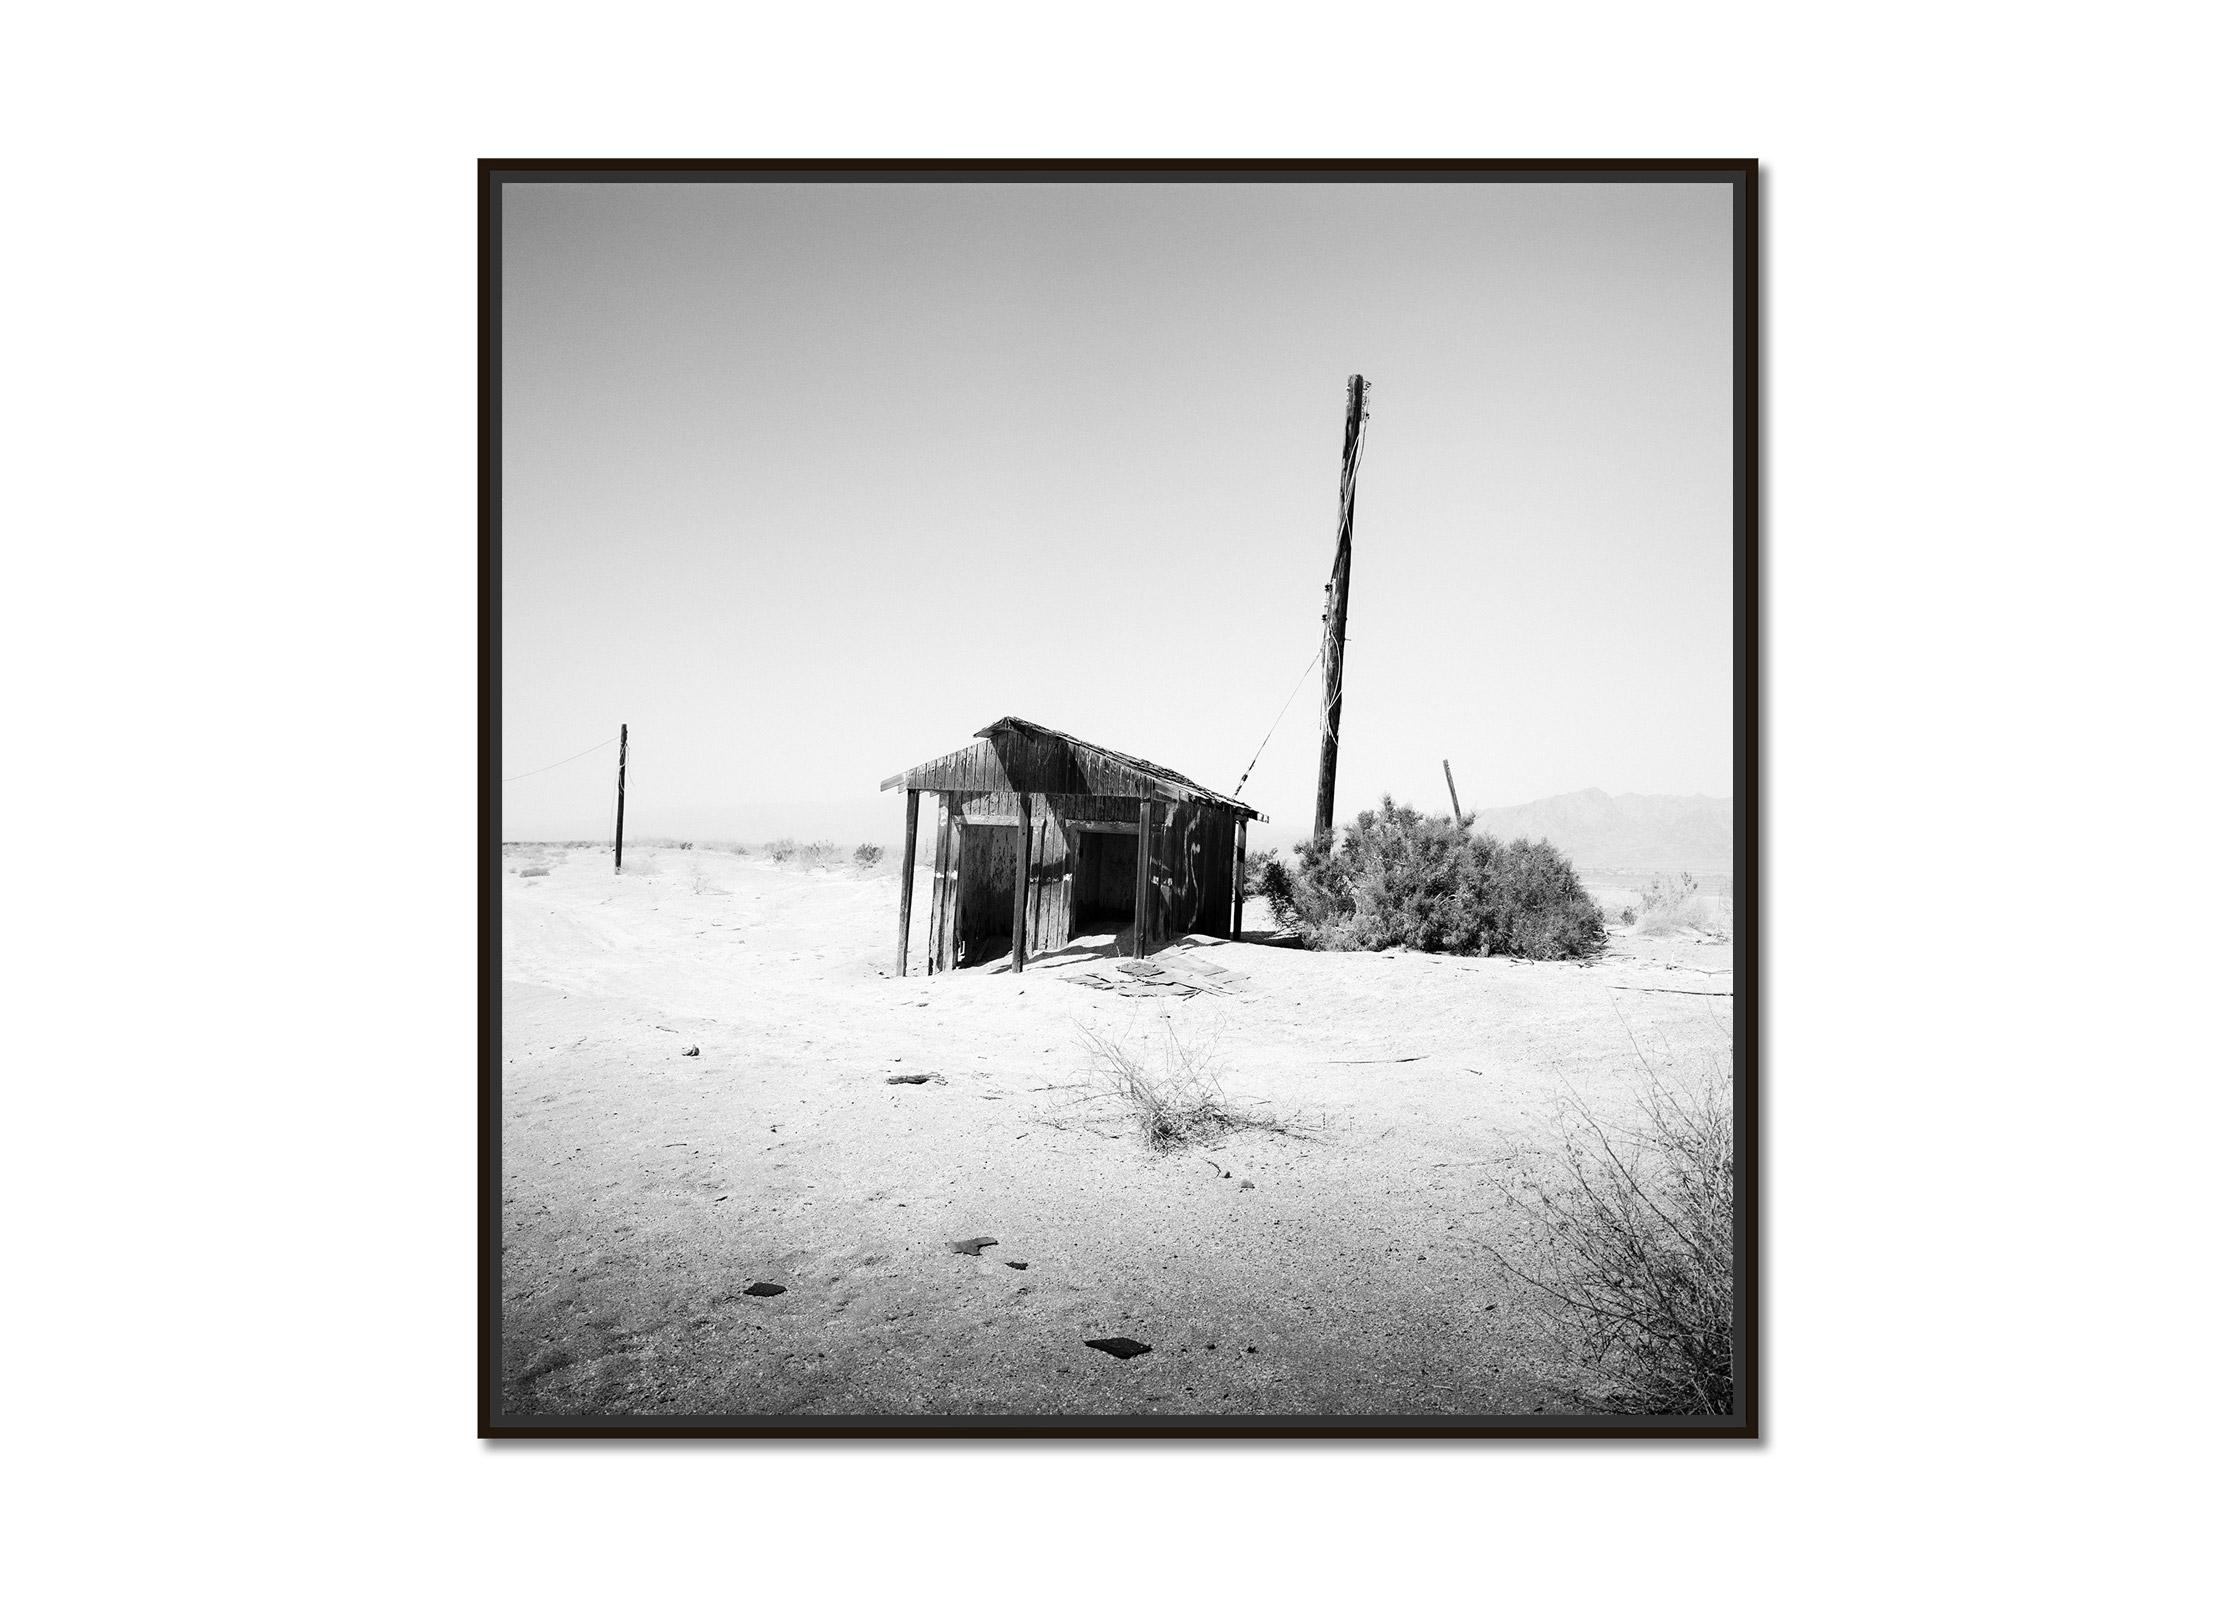 Abandoned Hut, desert, California, USA, black and white photography, landscape - Photograph by Gerald Berghammer